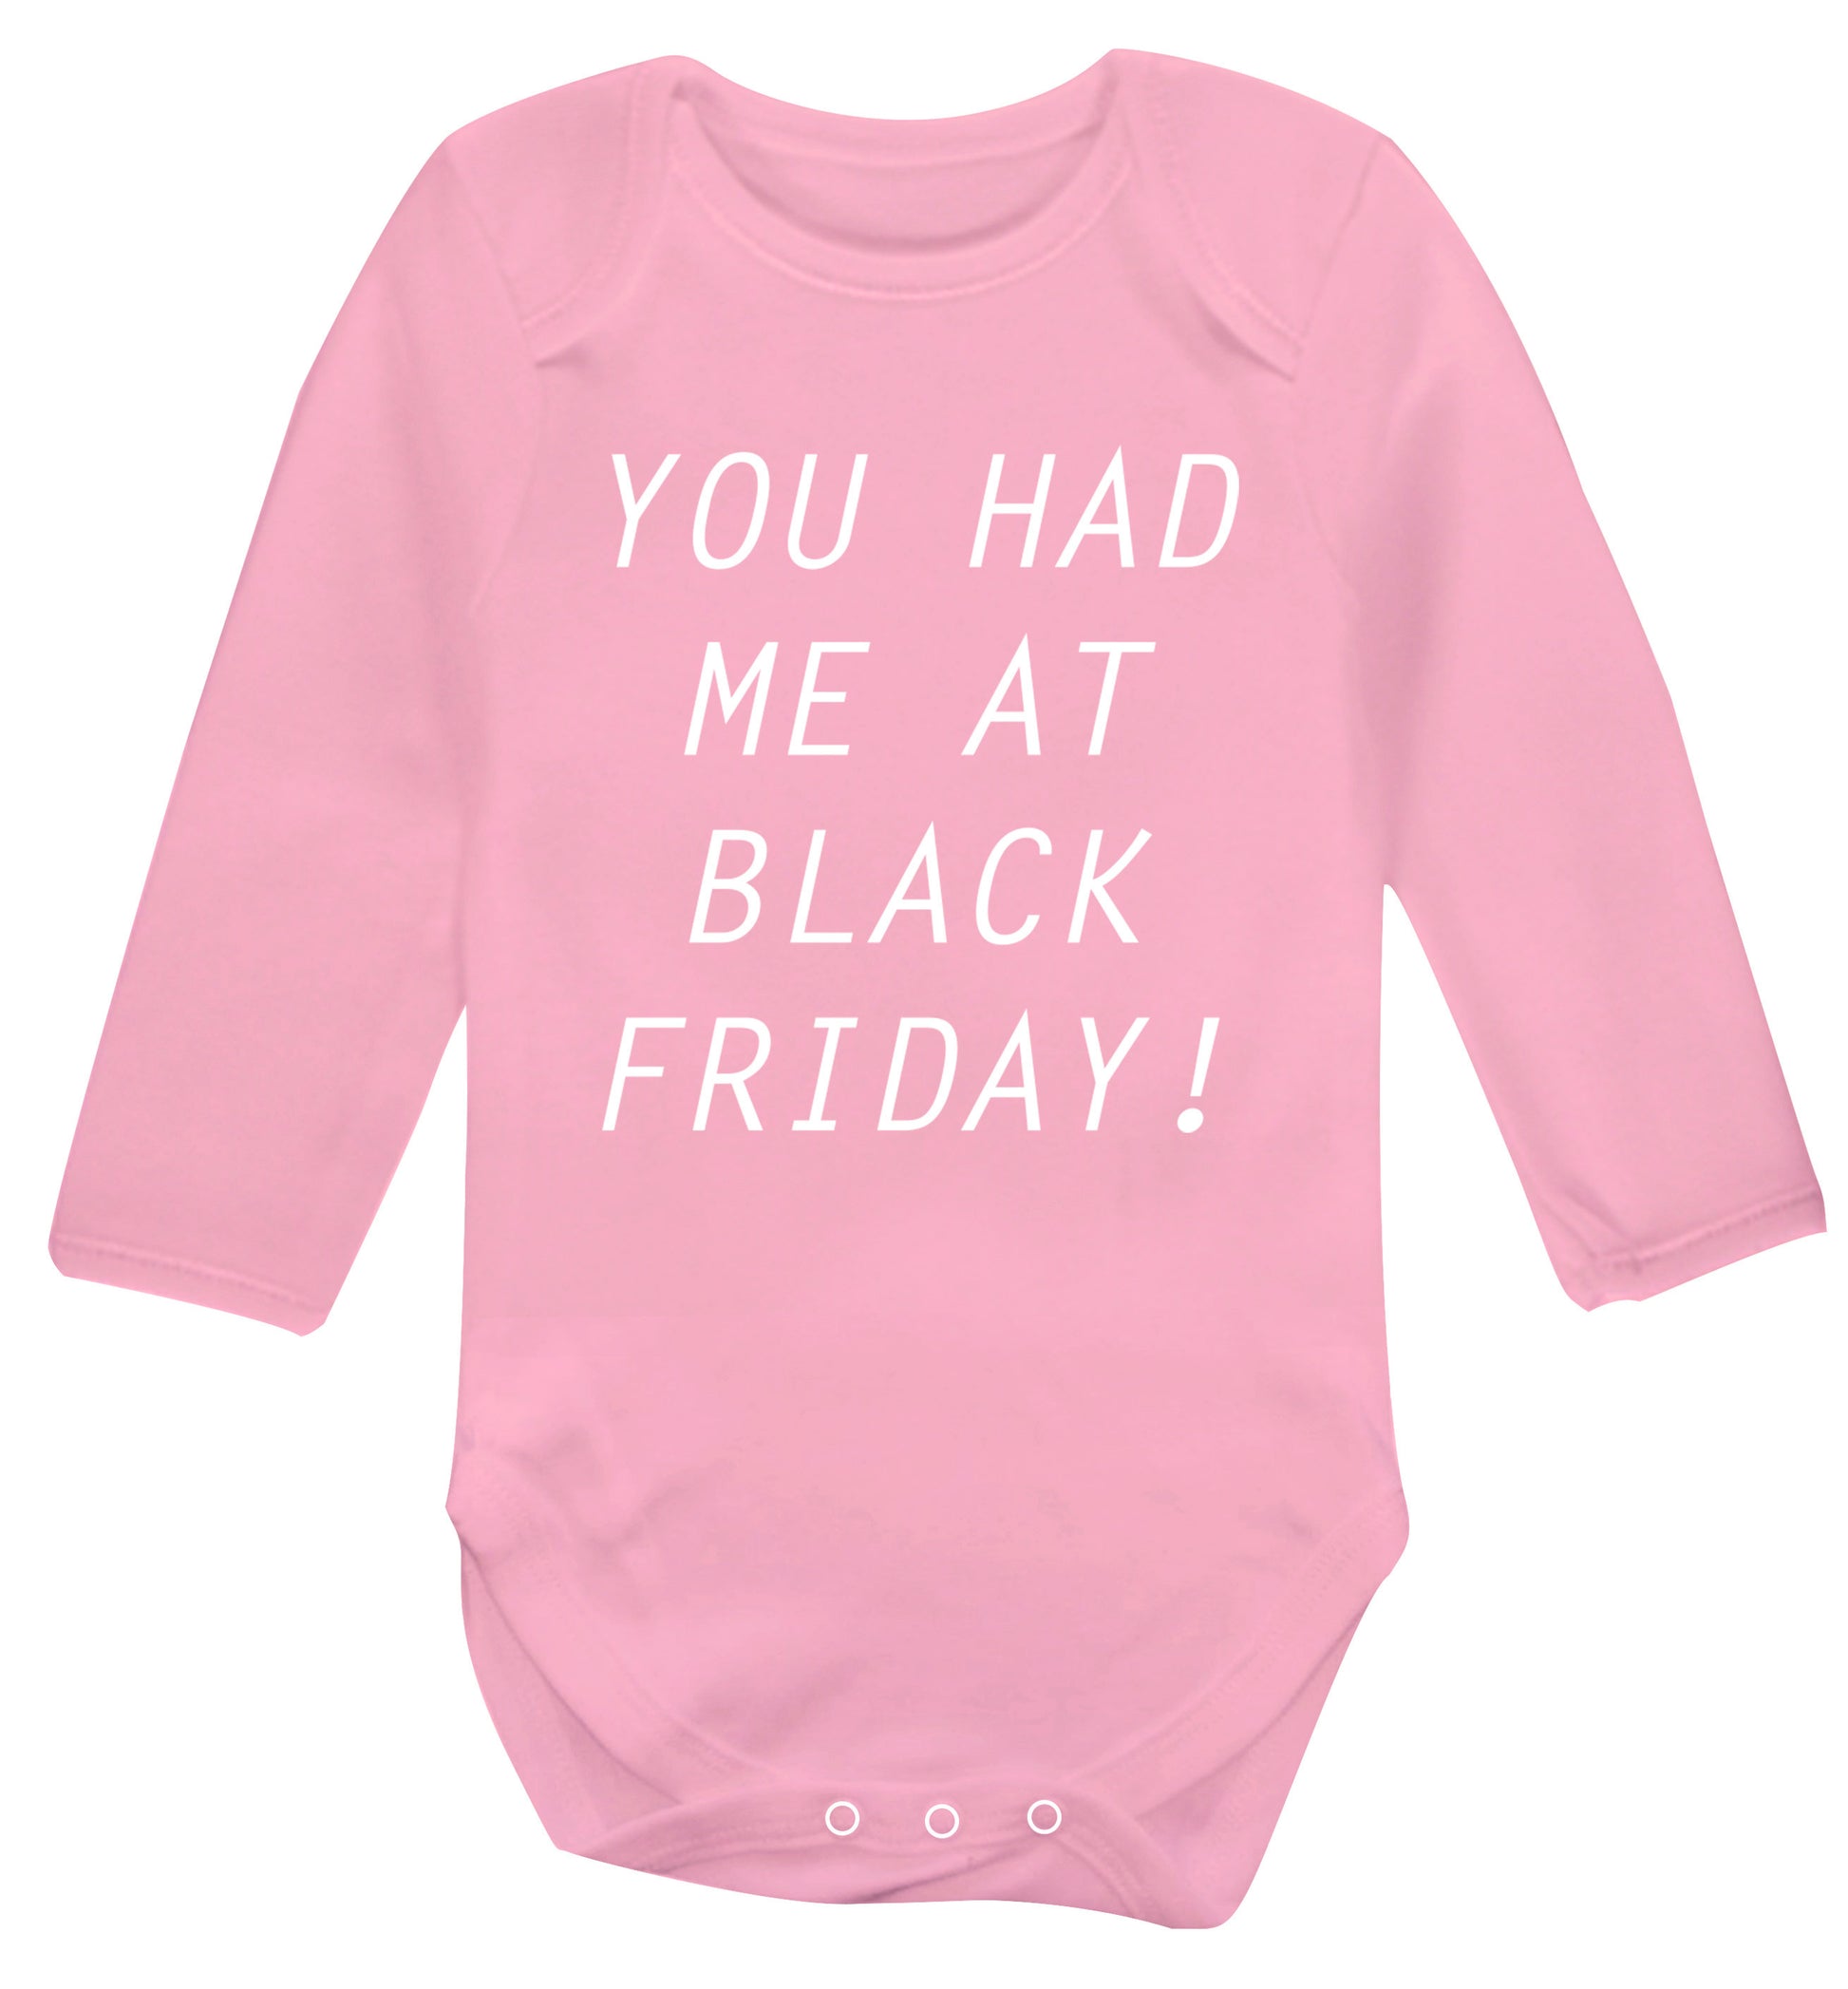 You had me at black friday Baby Vest long sleeved pale pink 6-12 months